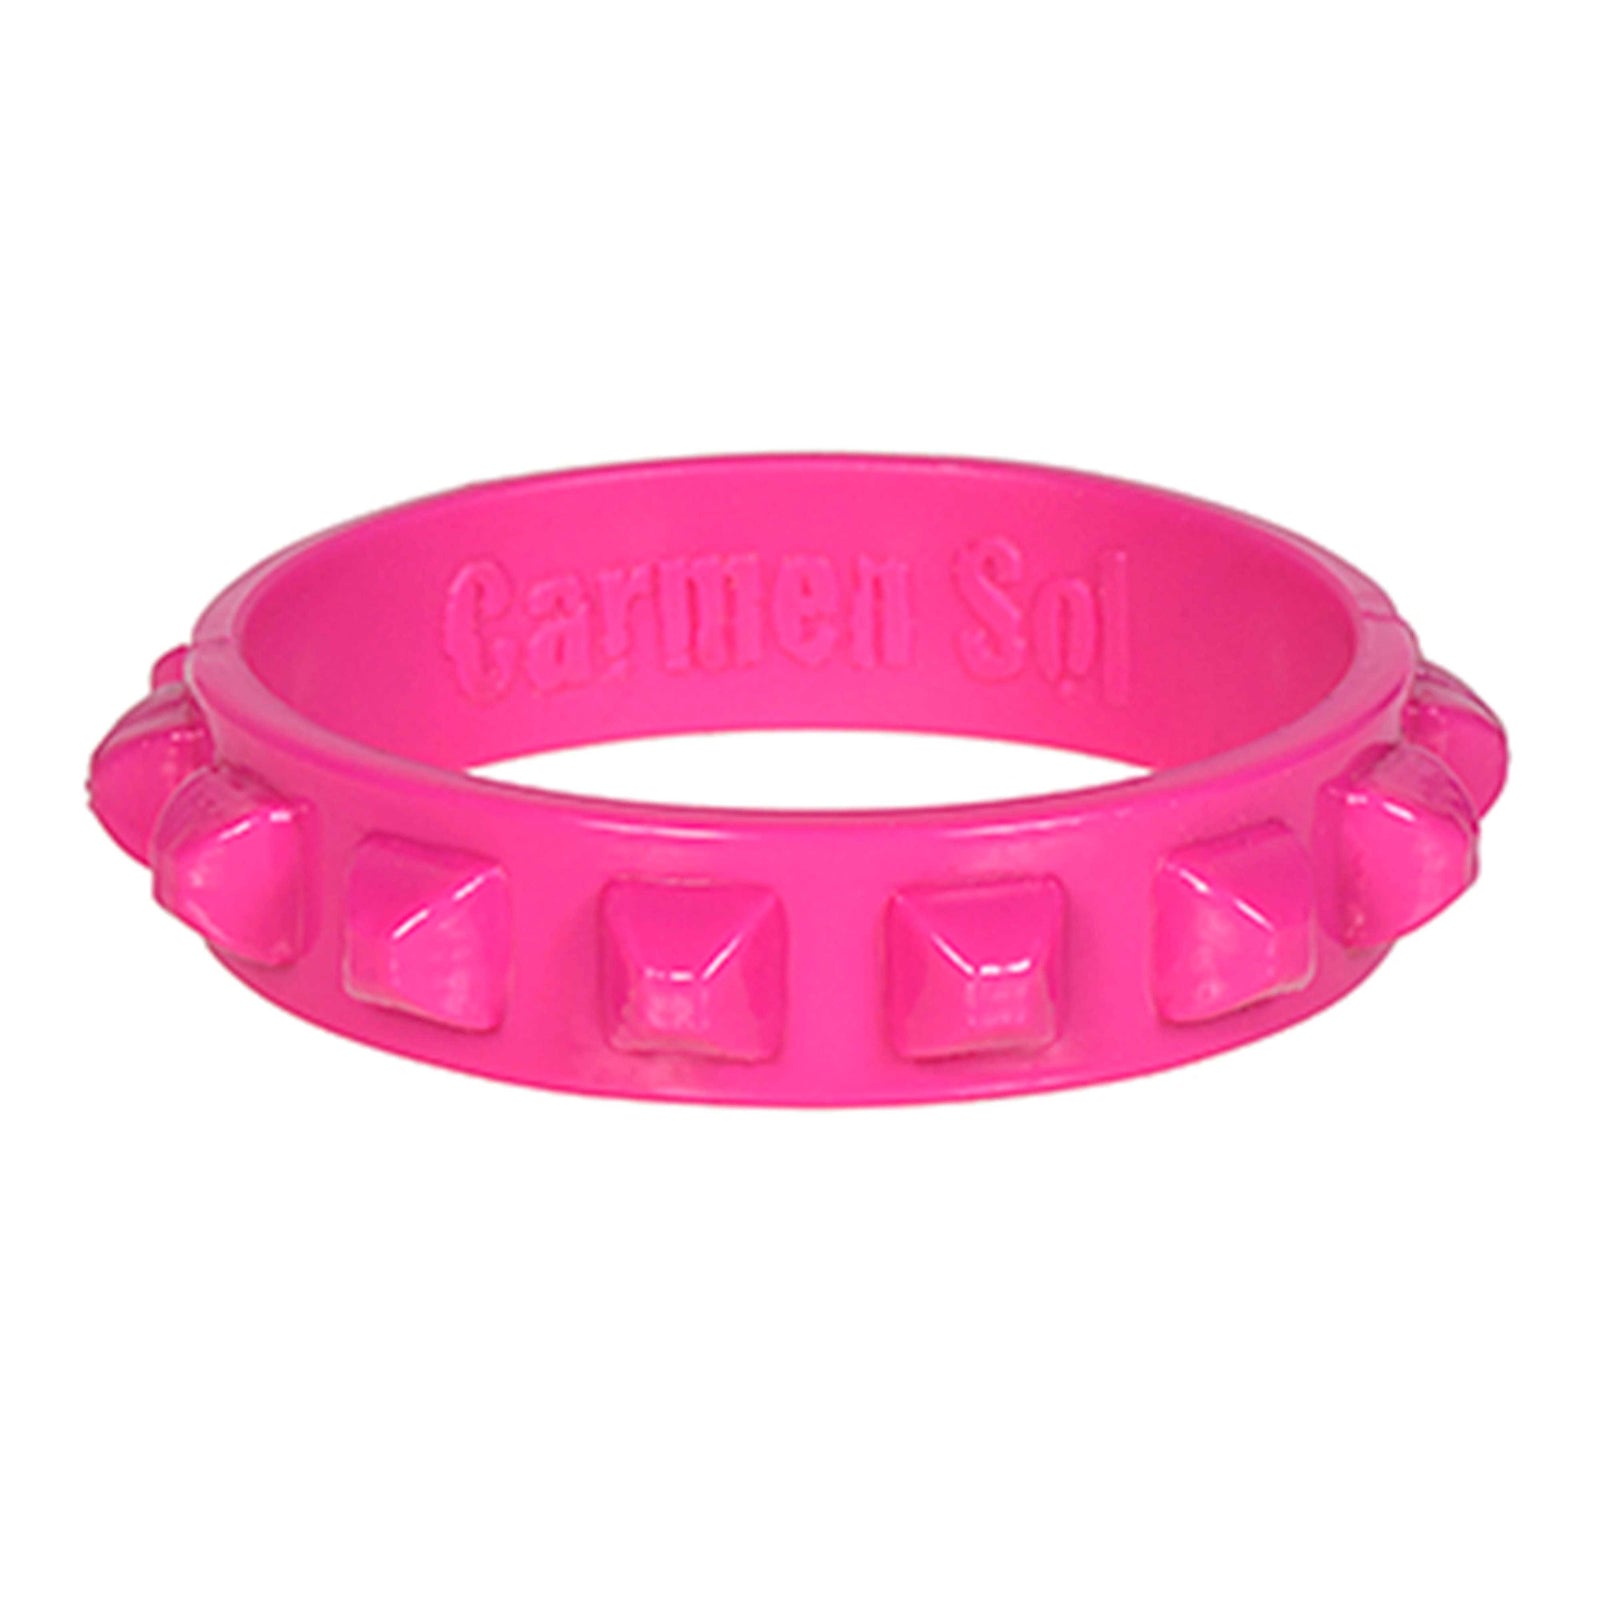 Colorful Jelly Glow Rubber Bracelets 5mm, Luminous Silicone Sports Wrist  Bands For Men And Women Fashionable Cuff Bangles And Accessories From  Woodenarts, $7.44 | DHgate.Com